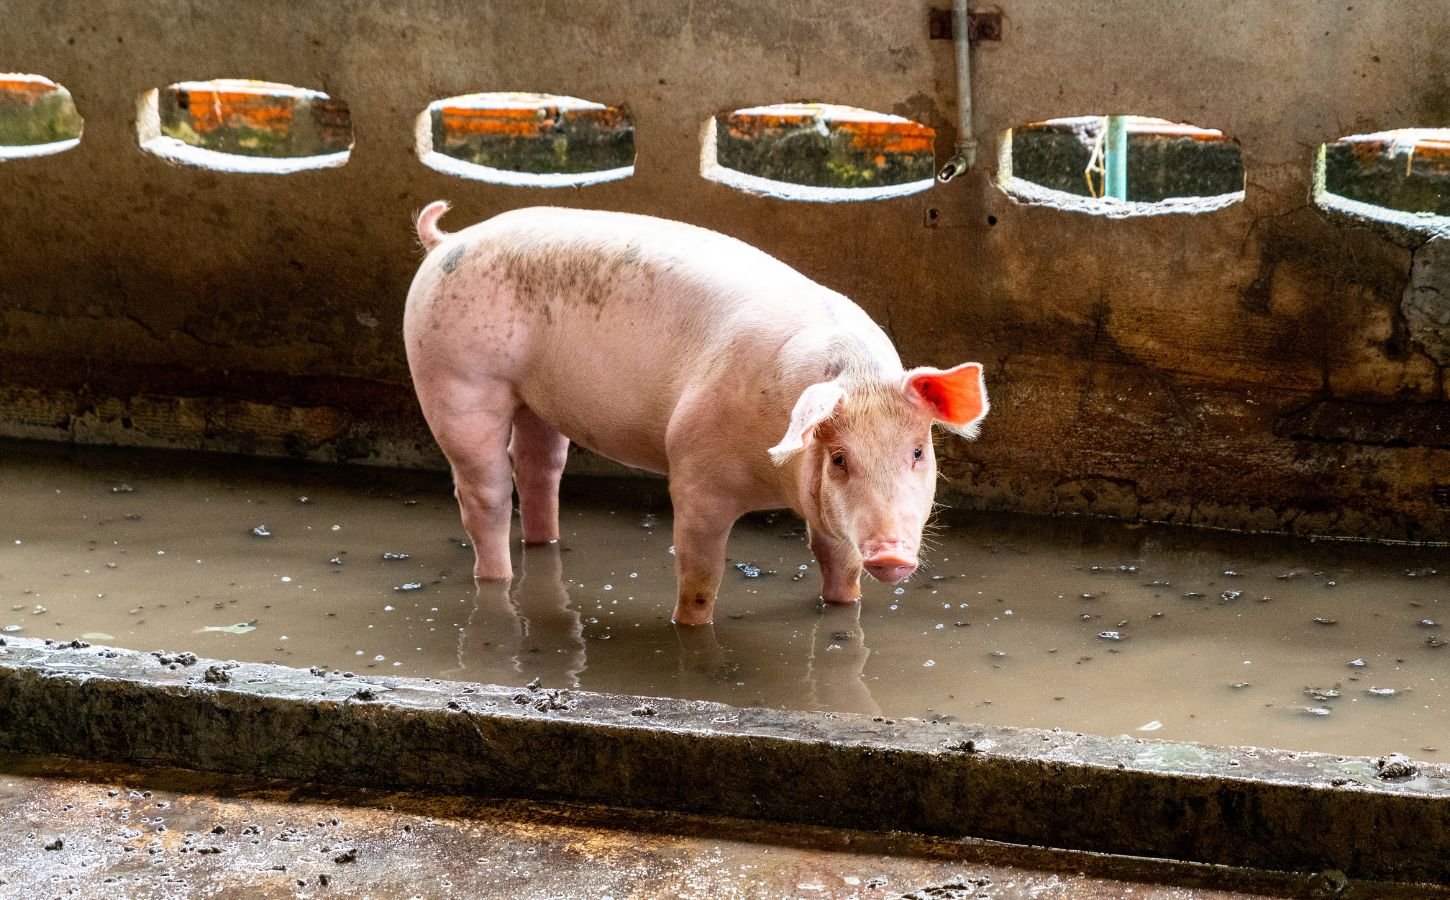 A pig standing in water in a factory farm, which have been linked to increased antibiotic resistance and superbugs